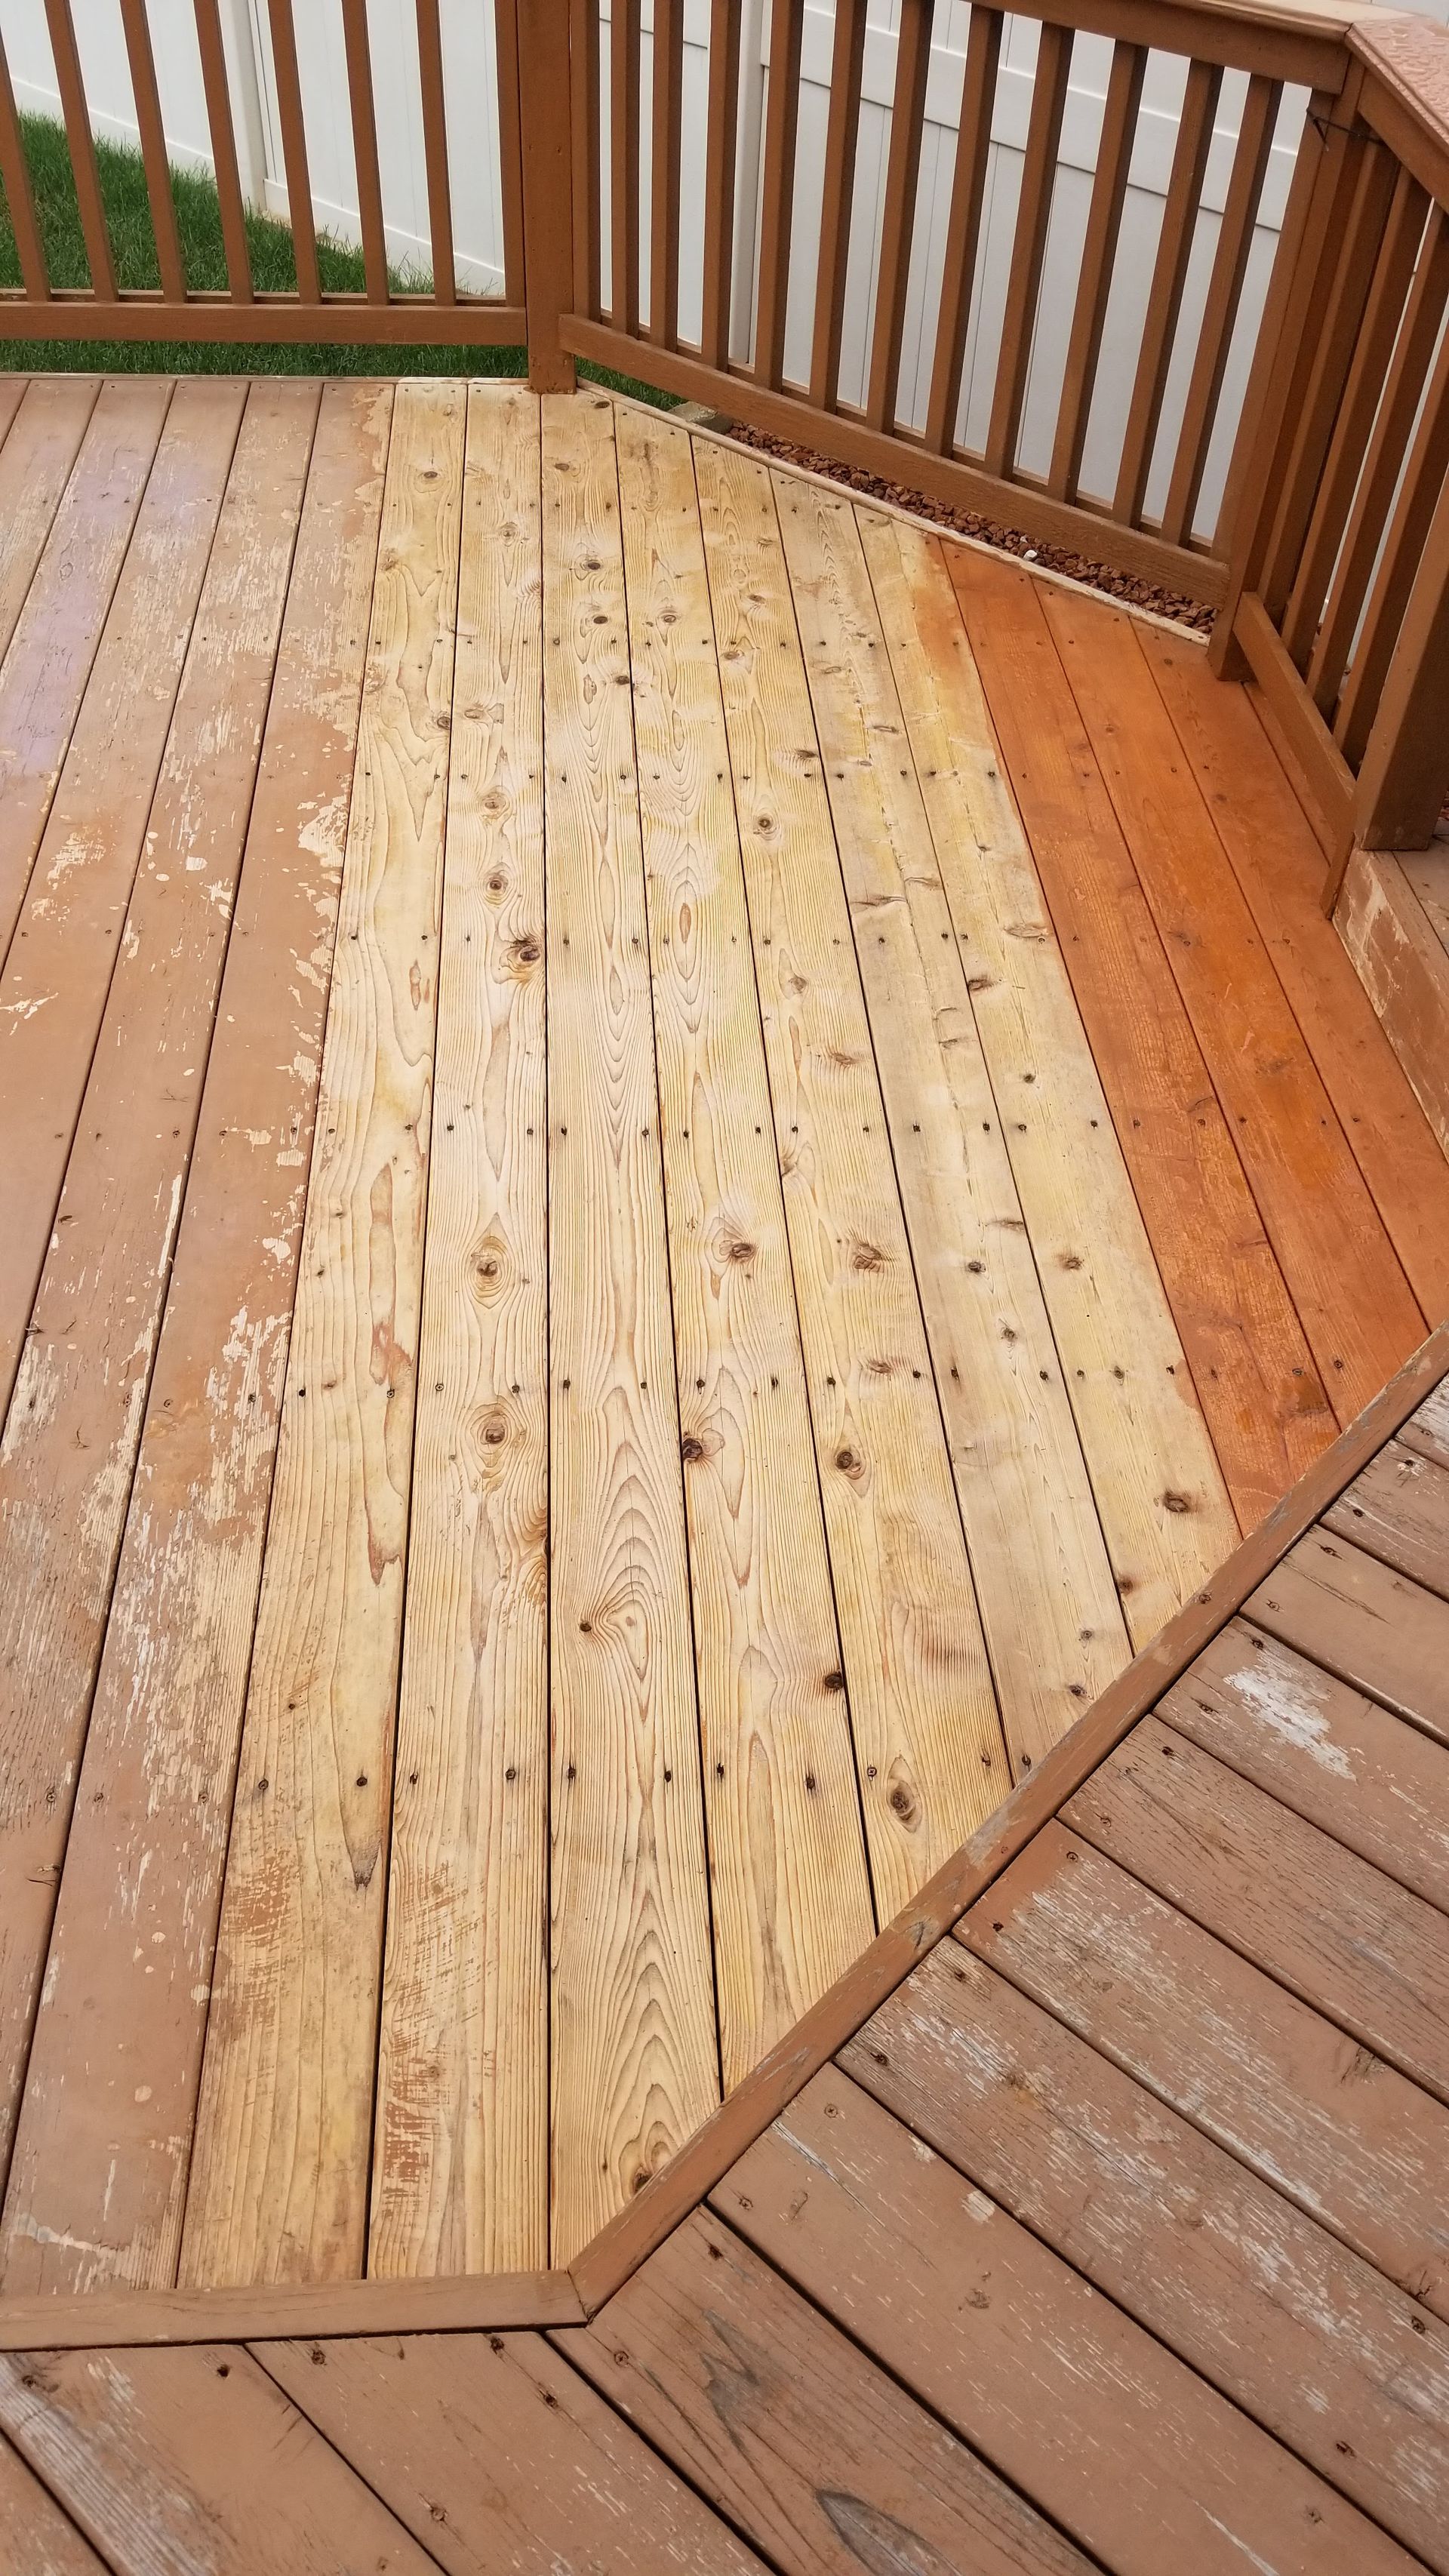 A wooden deck with a railing and a piece of plywood on it.